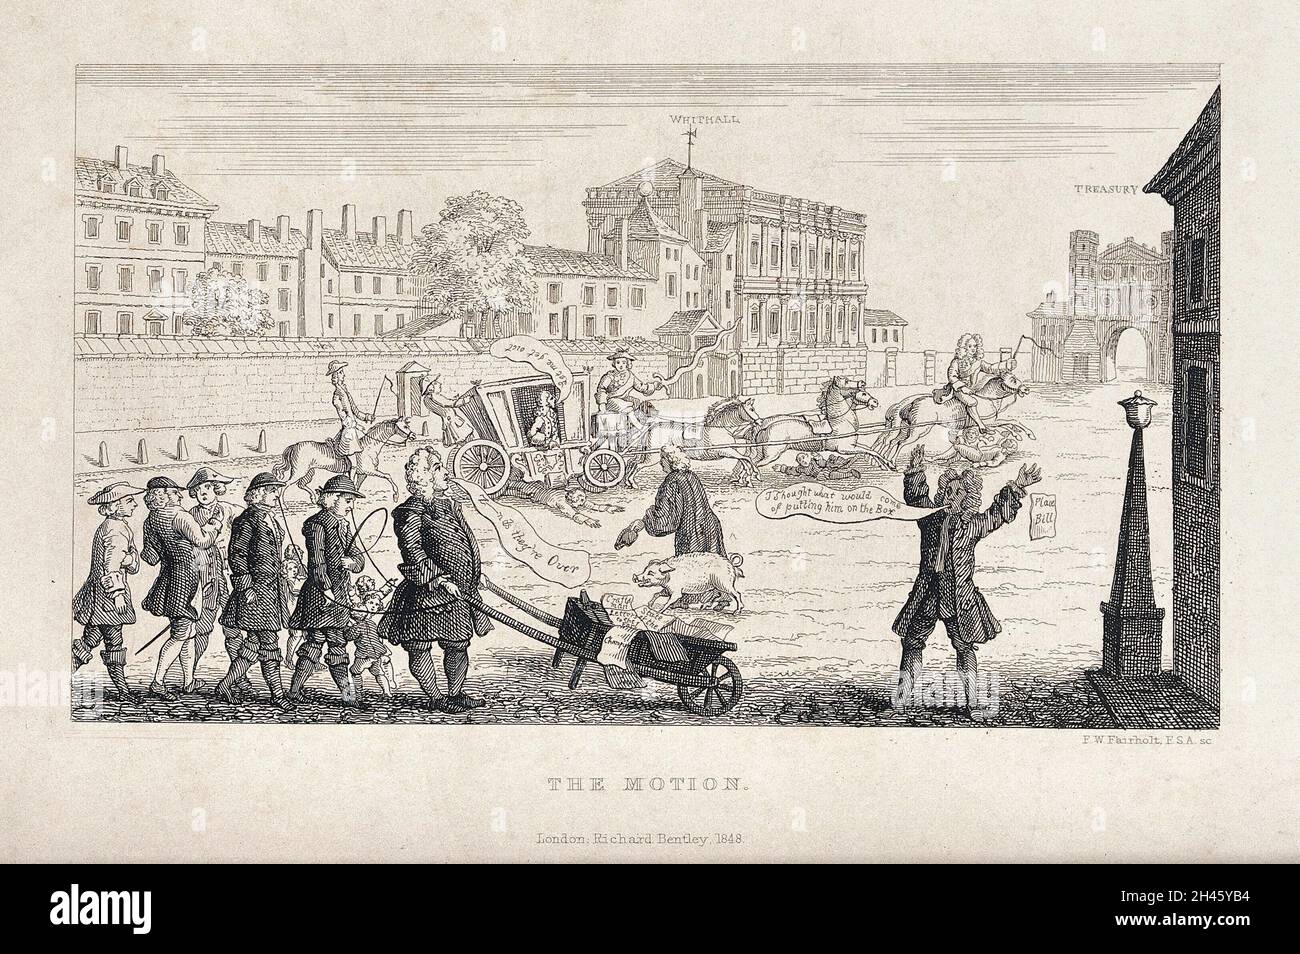 A group of people returns ballot papers by means of a wheelbarrow while people get run over by a horse carriage in the background; illustration of a political satire. Etching by F. W. Fairholt. Stock Photo